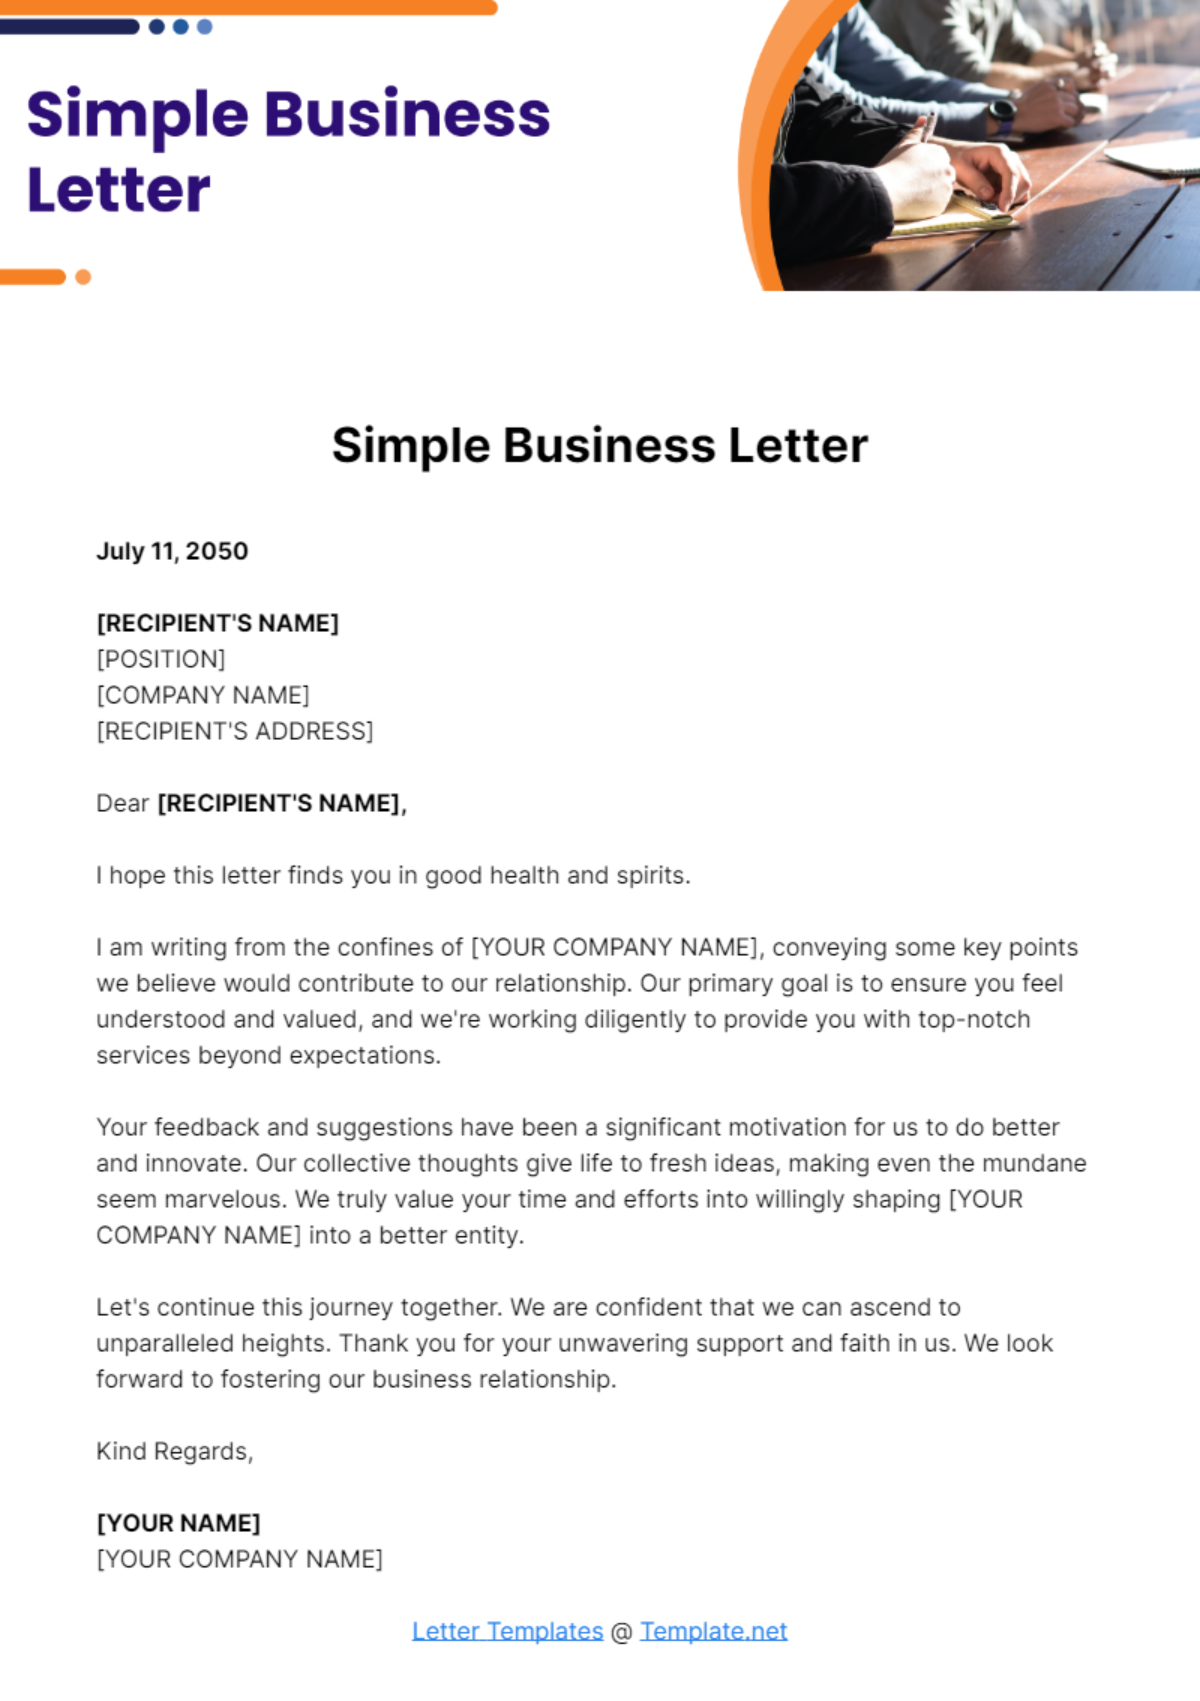 Simple Business Letter Template